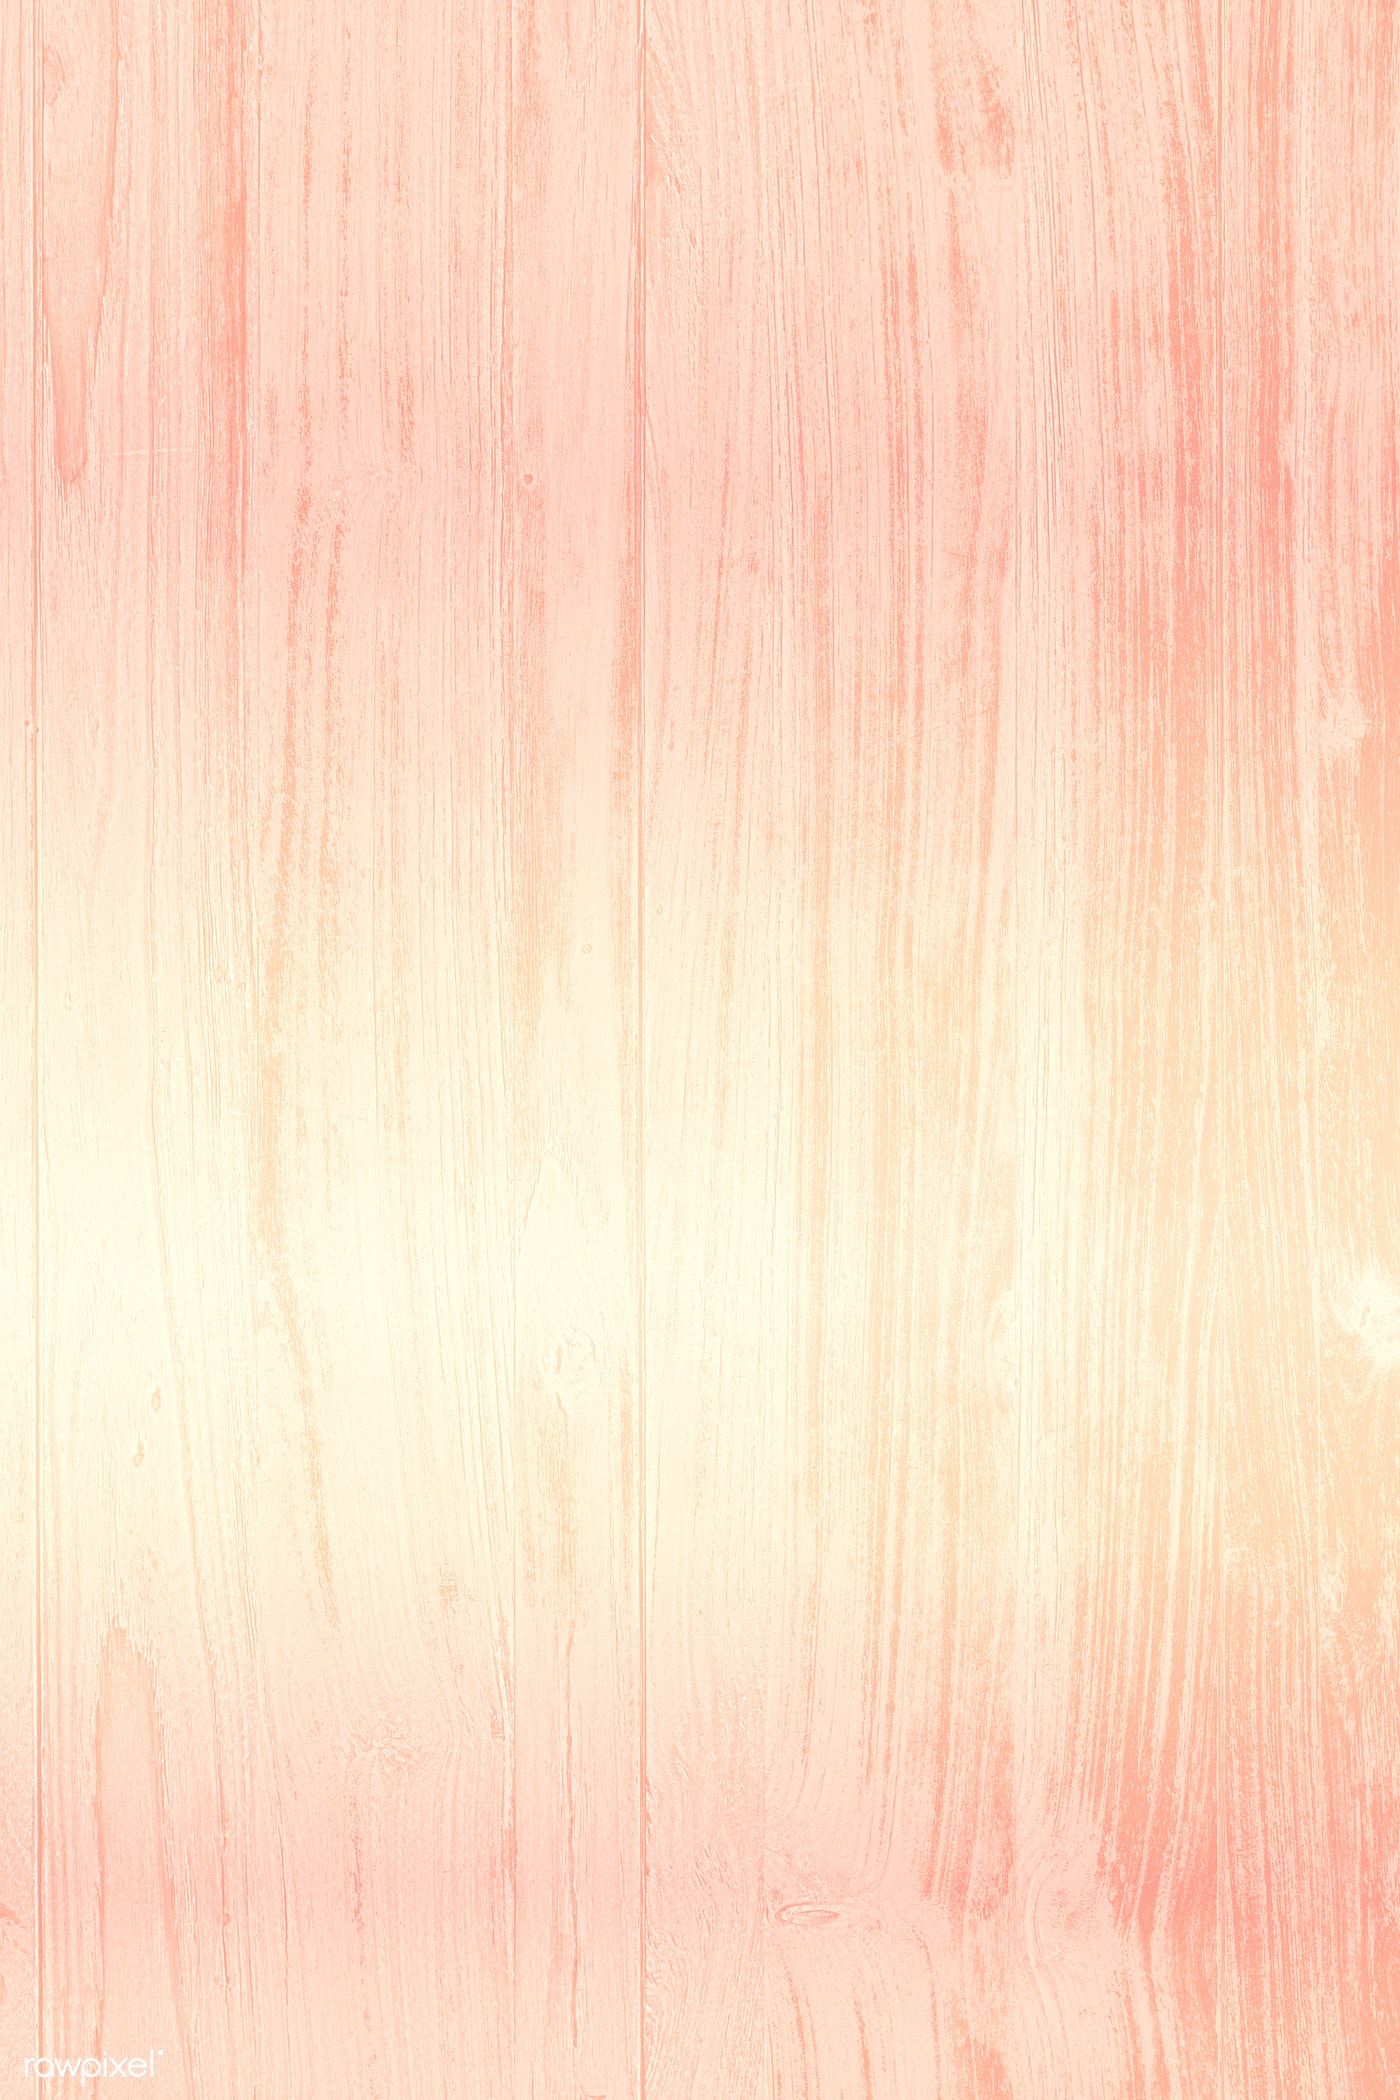 Abstract Peach Color Background Design Image By Rawpixel